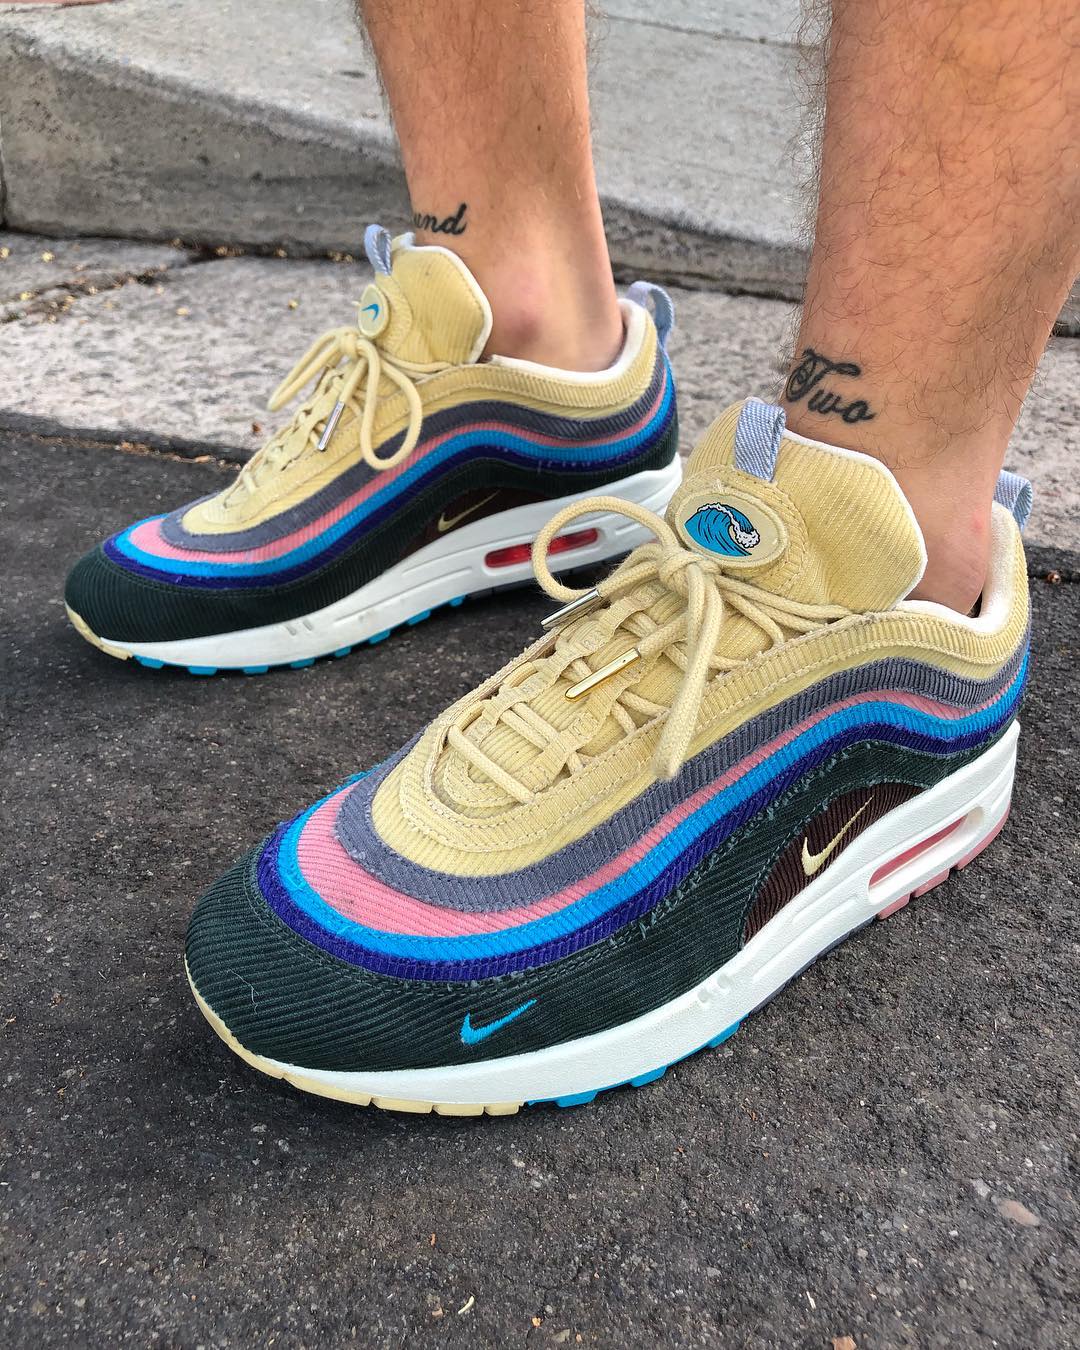 nike-air-max-1-97-sean-wotherspoon-release